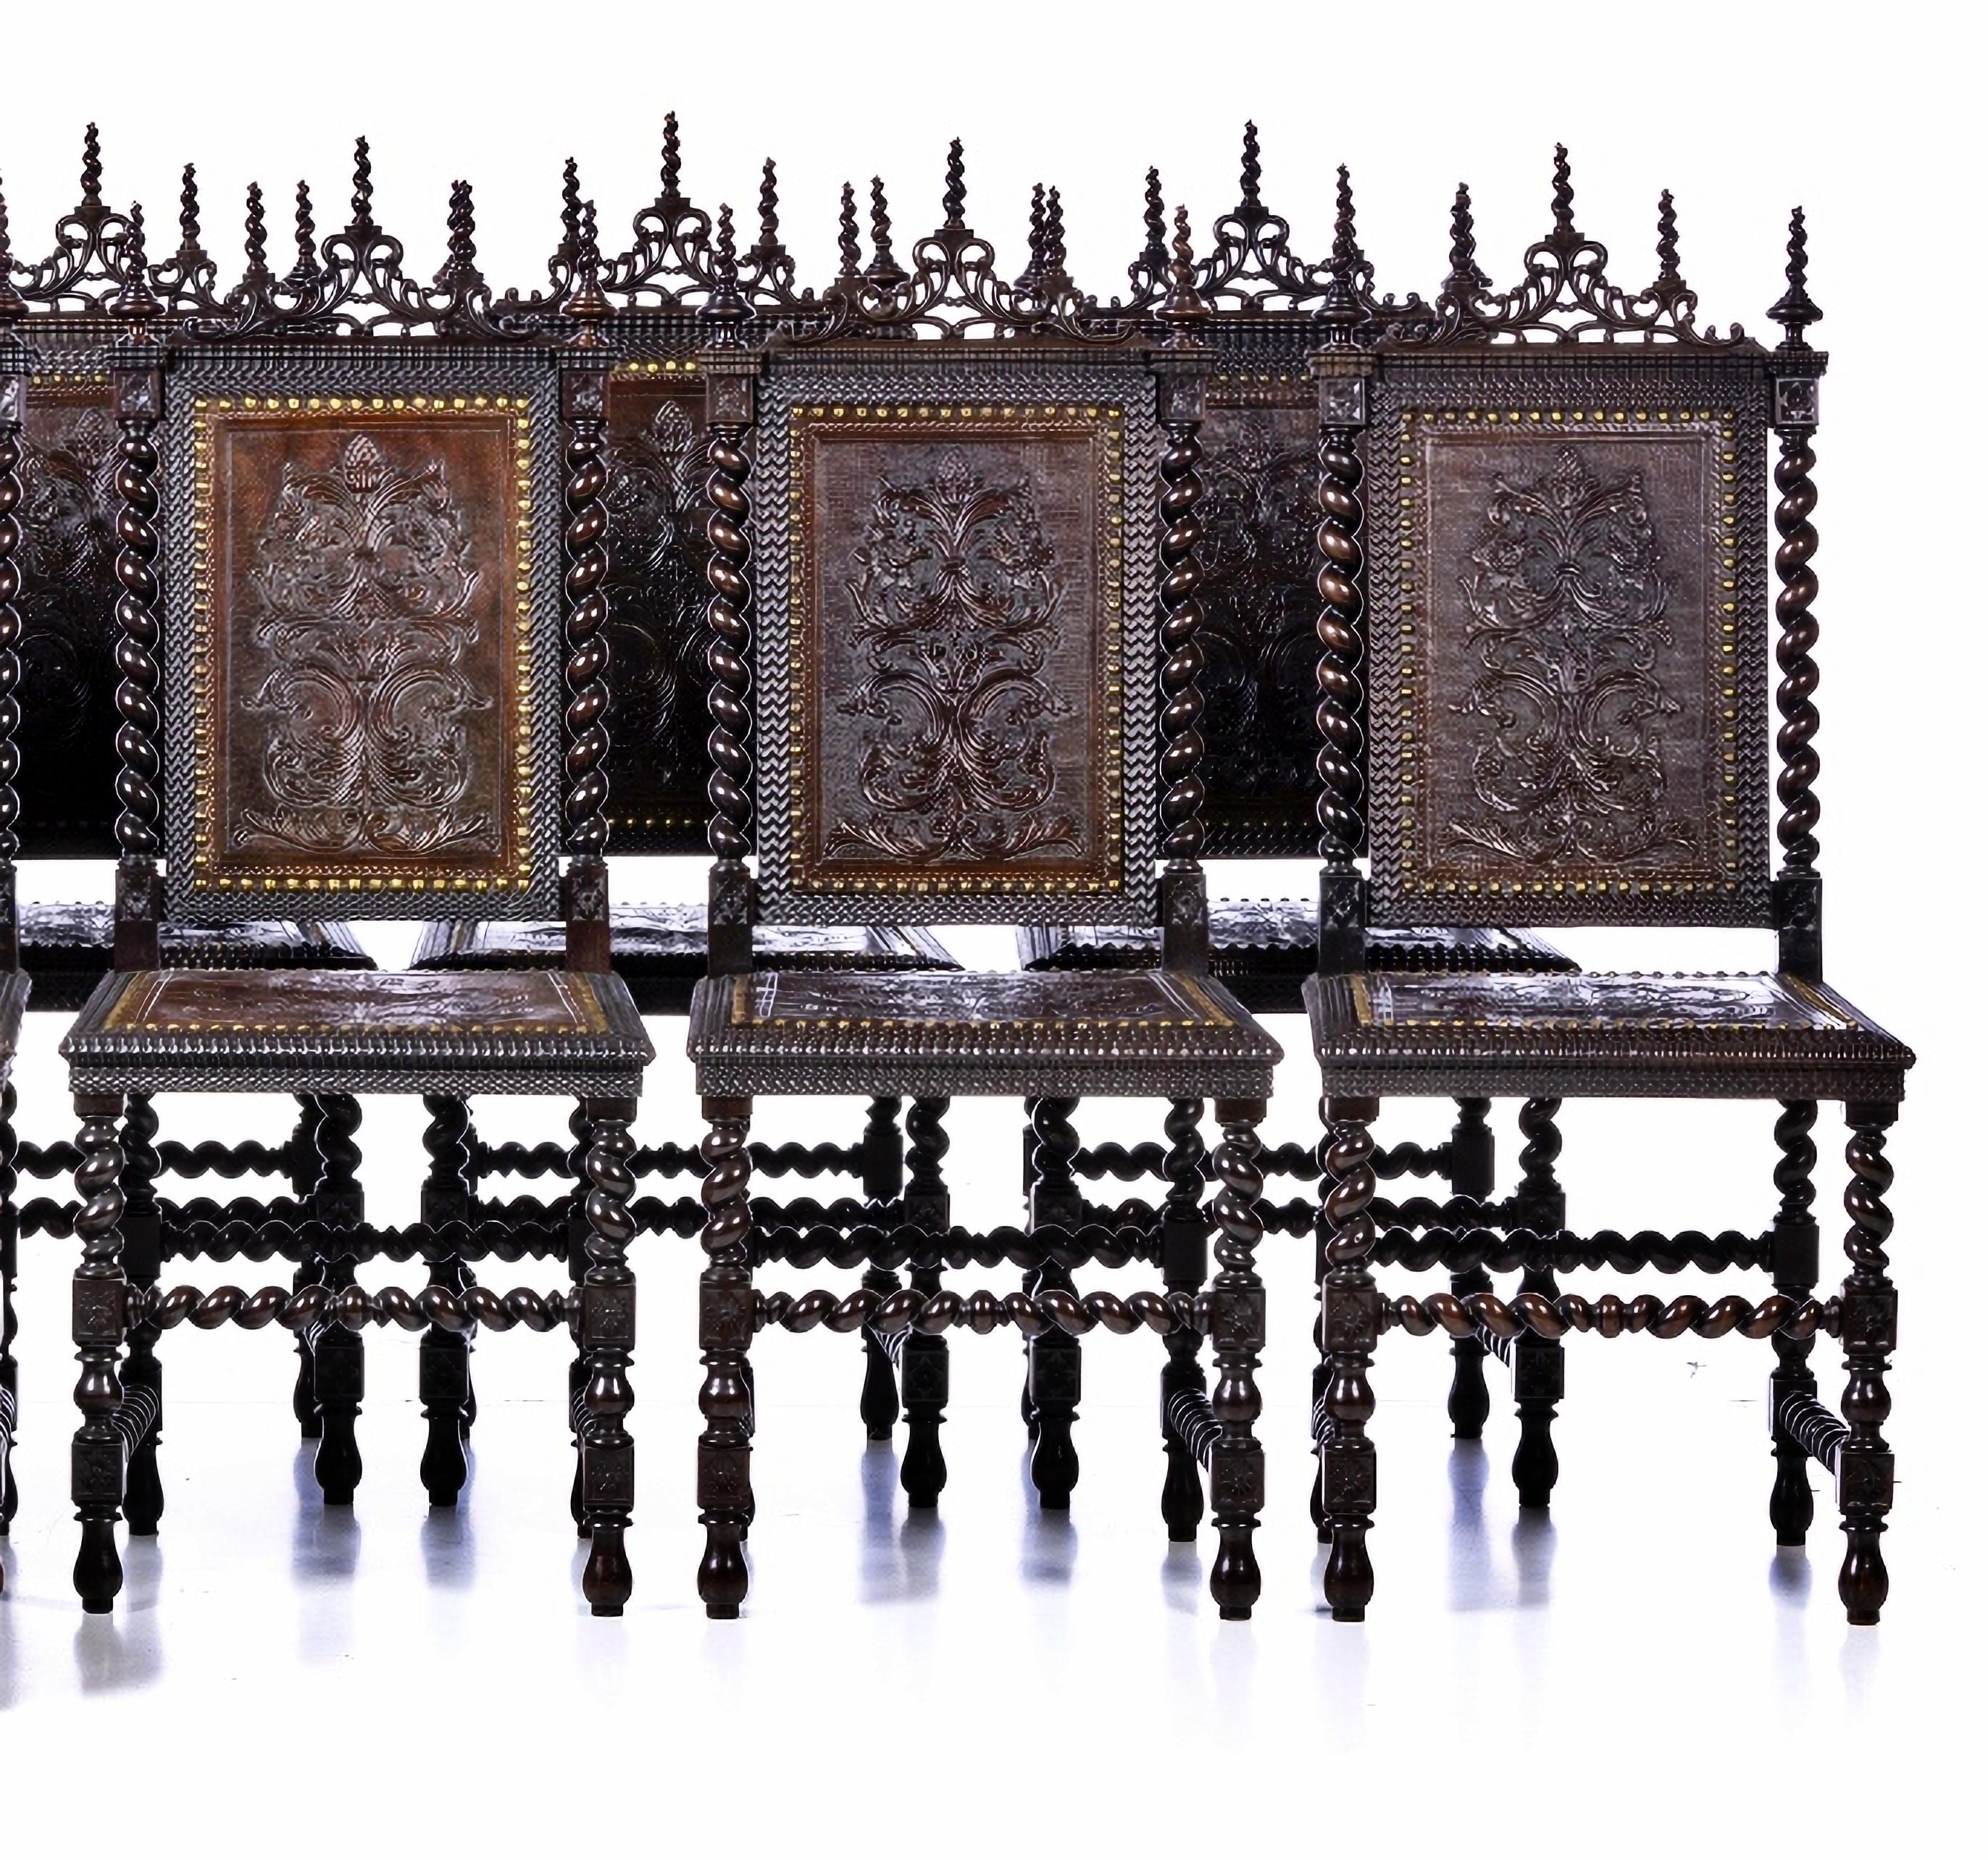 Renaissance SET OF TWELVE PORTUGUESE CHAIRS  19th Century in carved Rosewood Wood